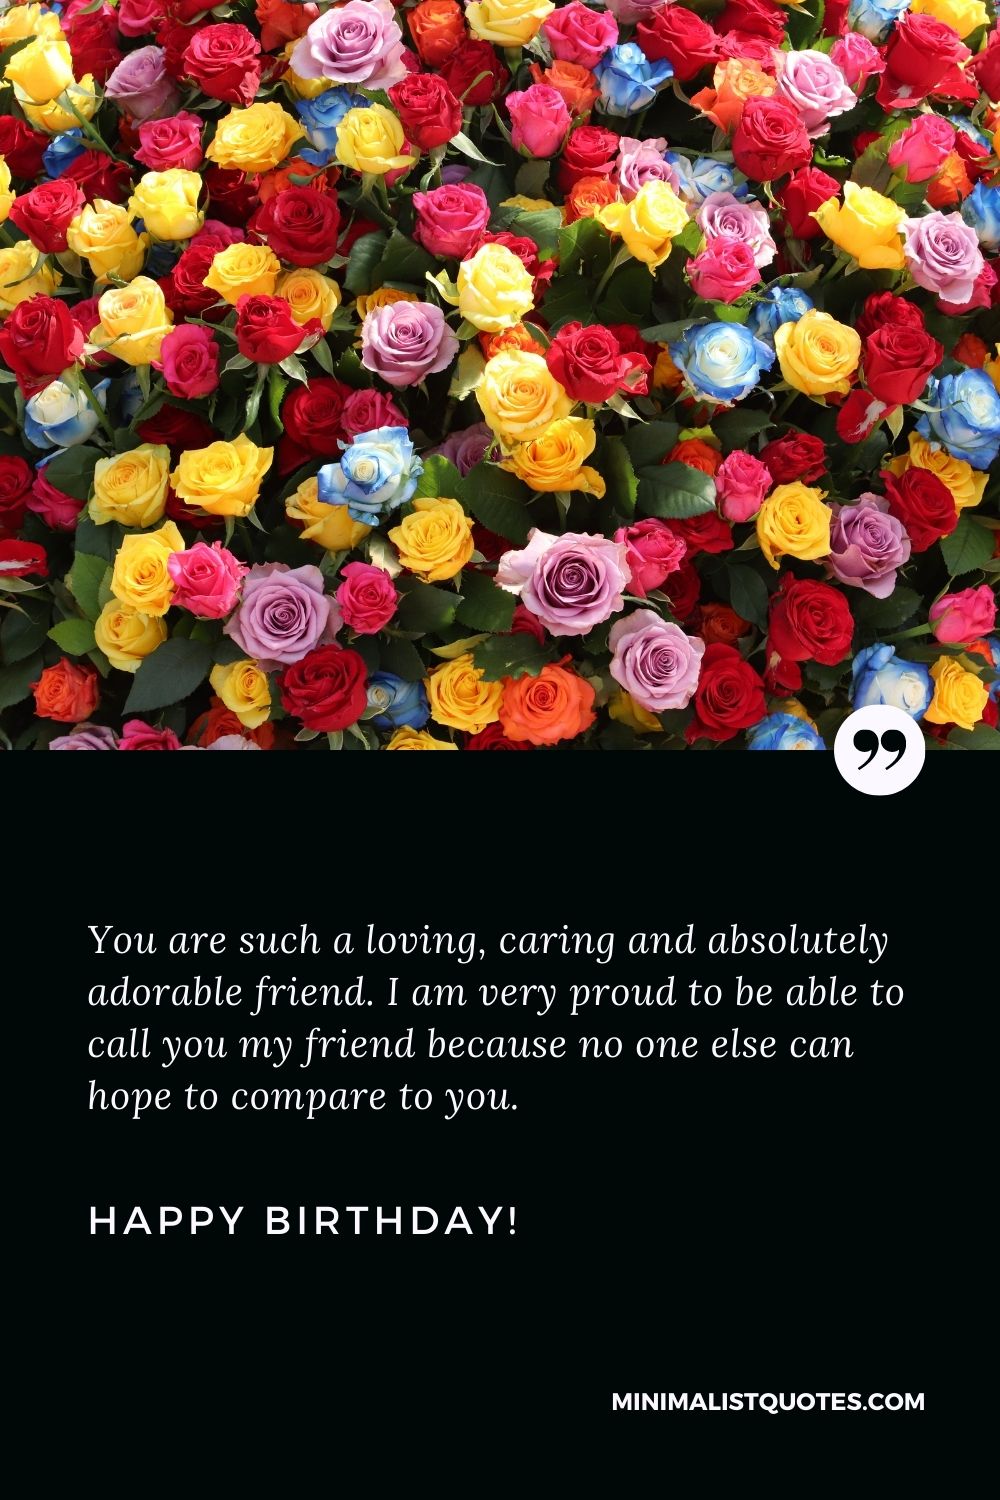 Happy birthday wishes for best friend: You are such a loving, caring and absolutely adorable friend. I am very proud to be able to call you my friend because no one else can hope to compare to you. Happy Birthday!